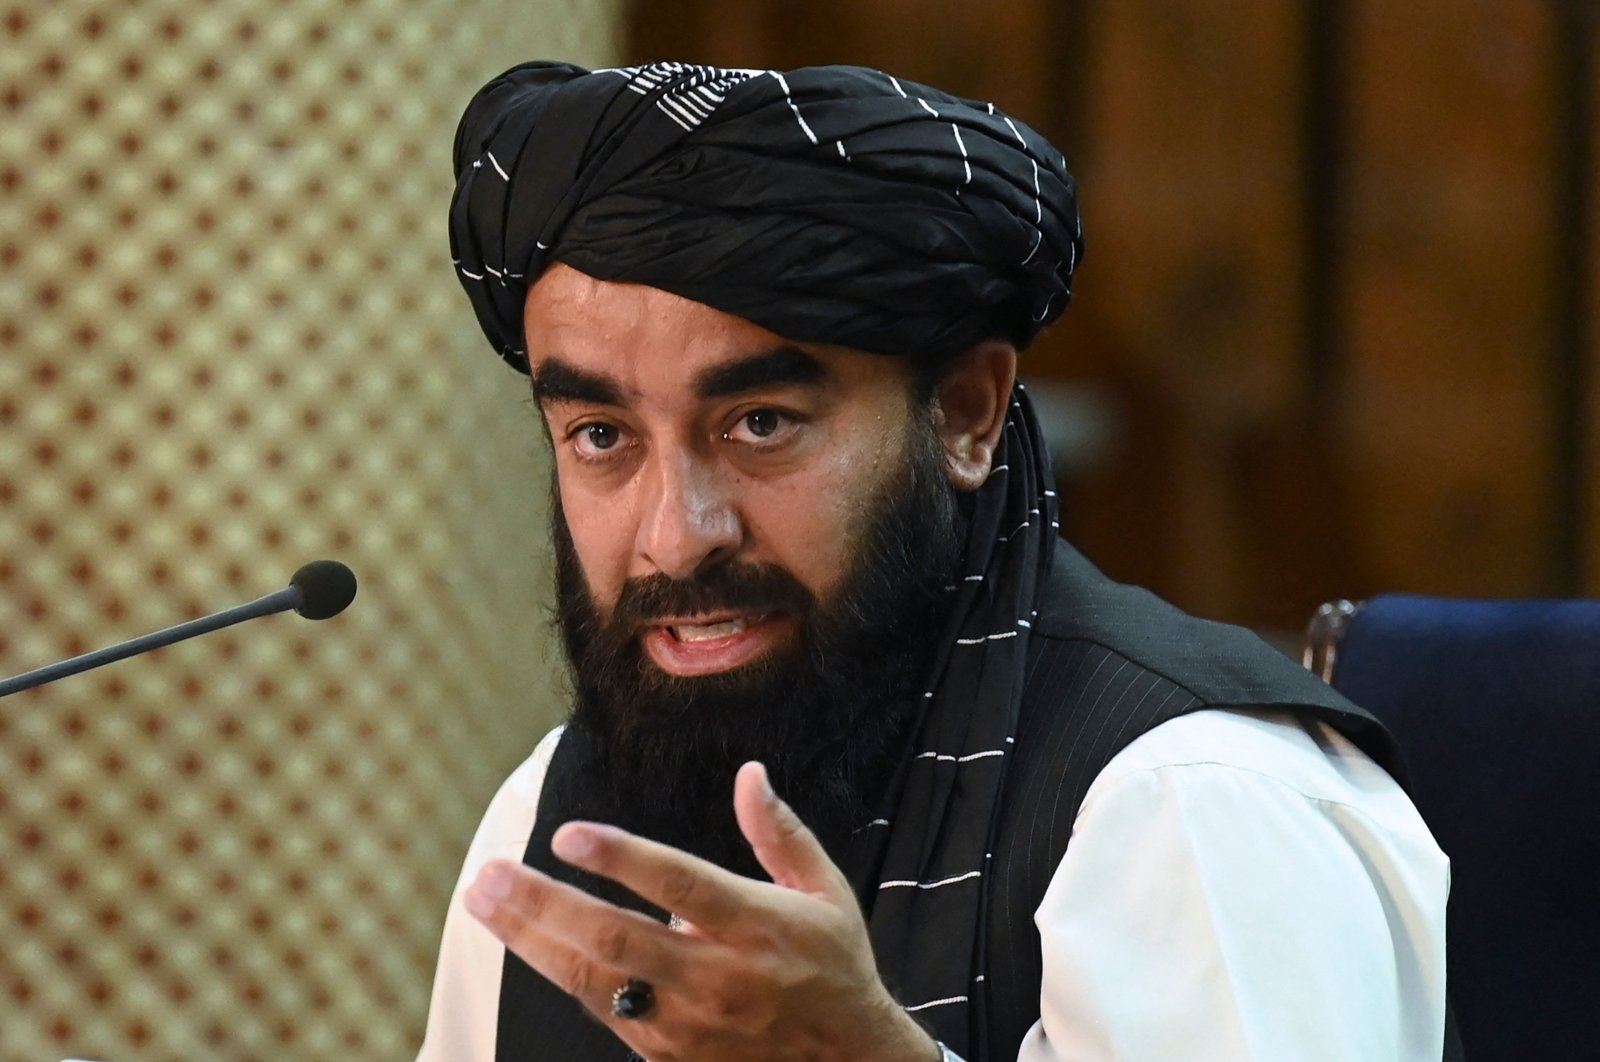 Taliban spokesperson Zabihullah Mujahid addresses a press conference in Kabul, Afghanistan, Sept. 7, 2021. (AFP Photo)